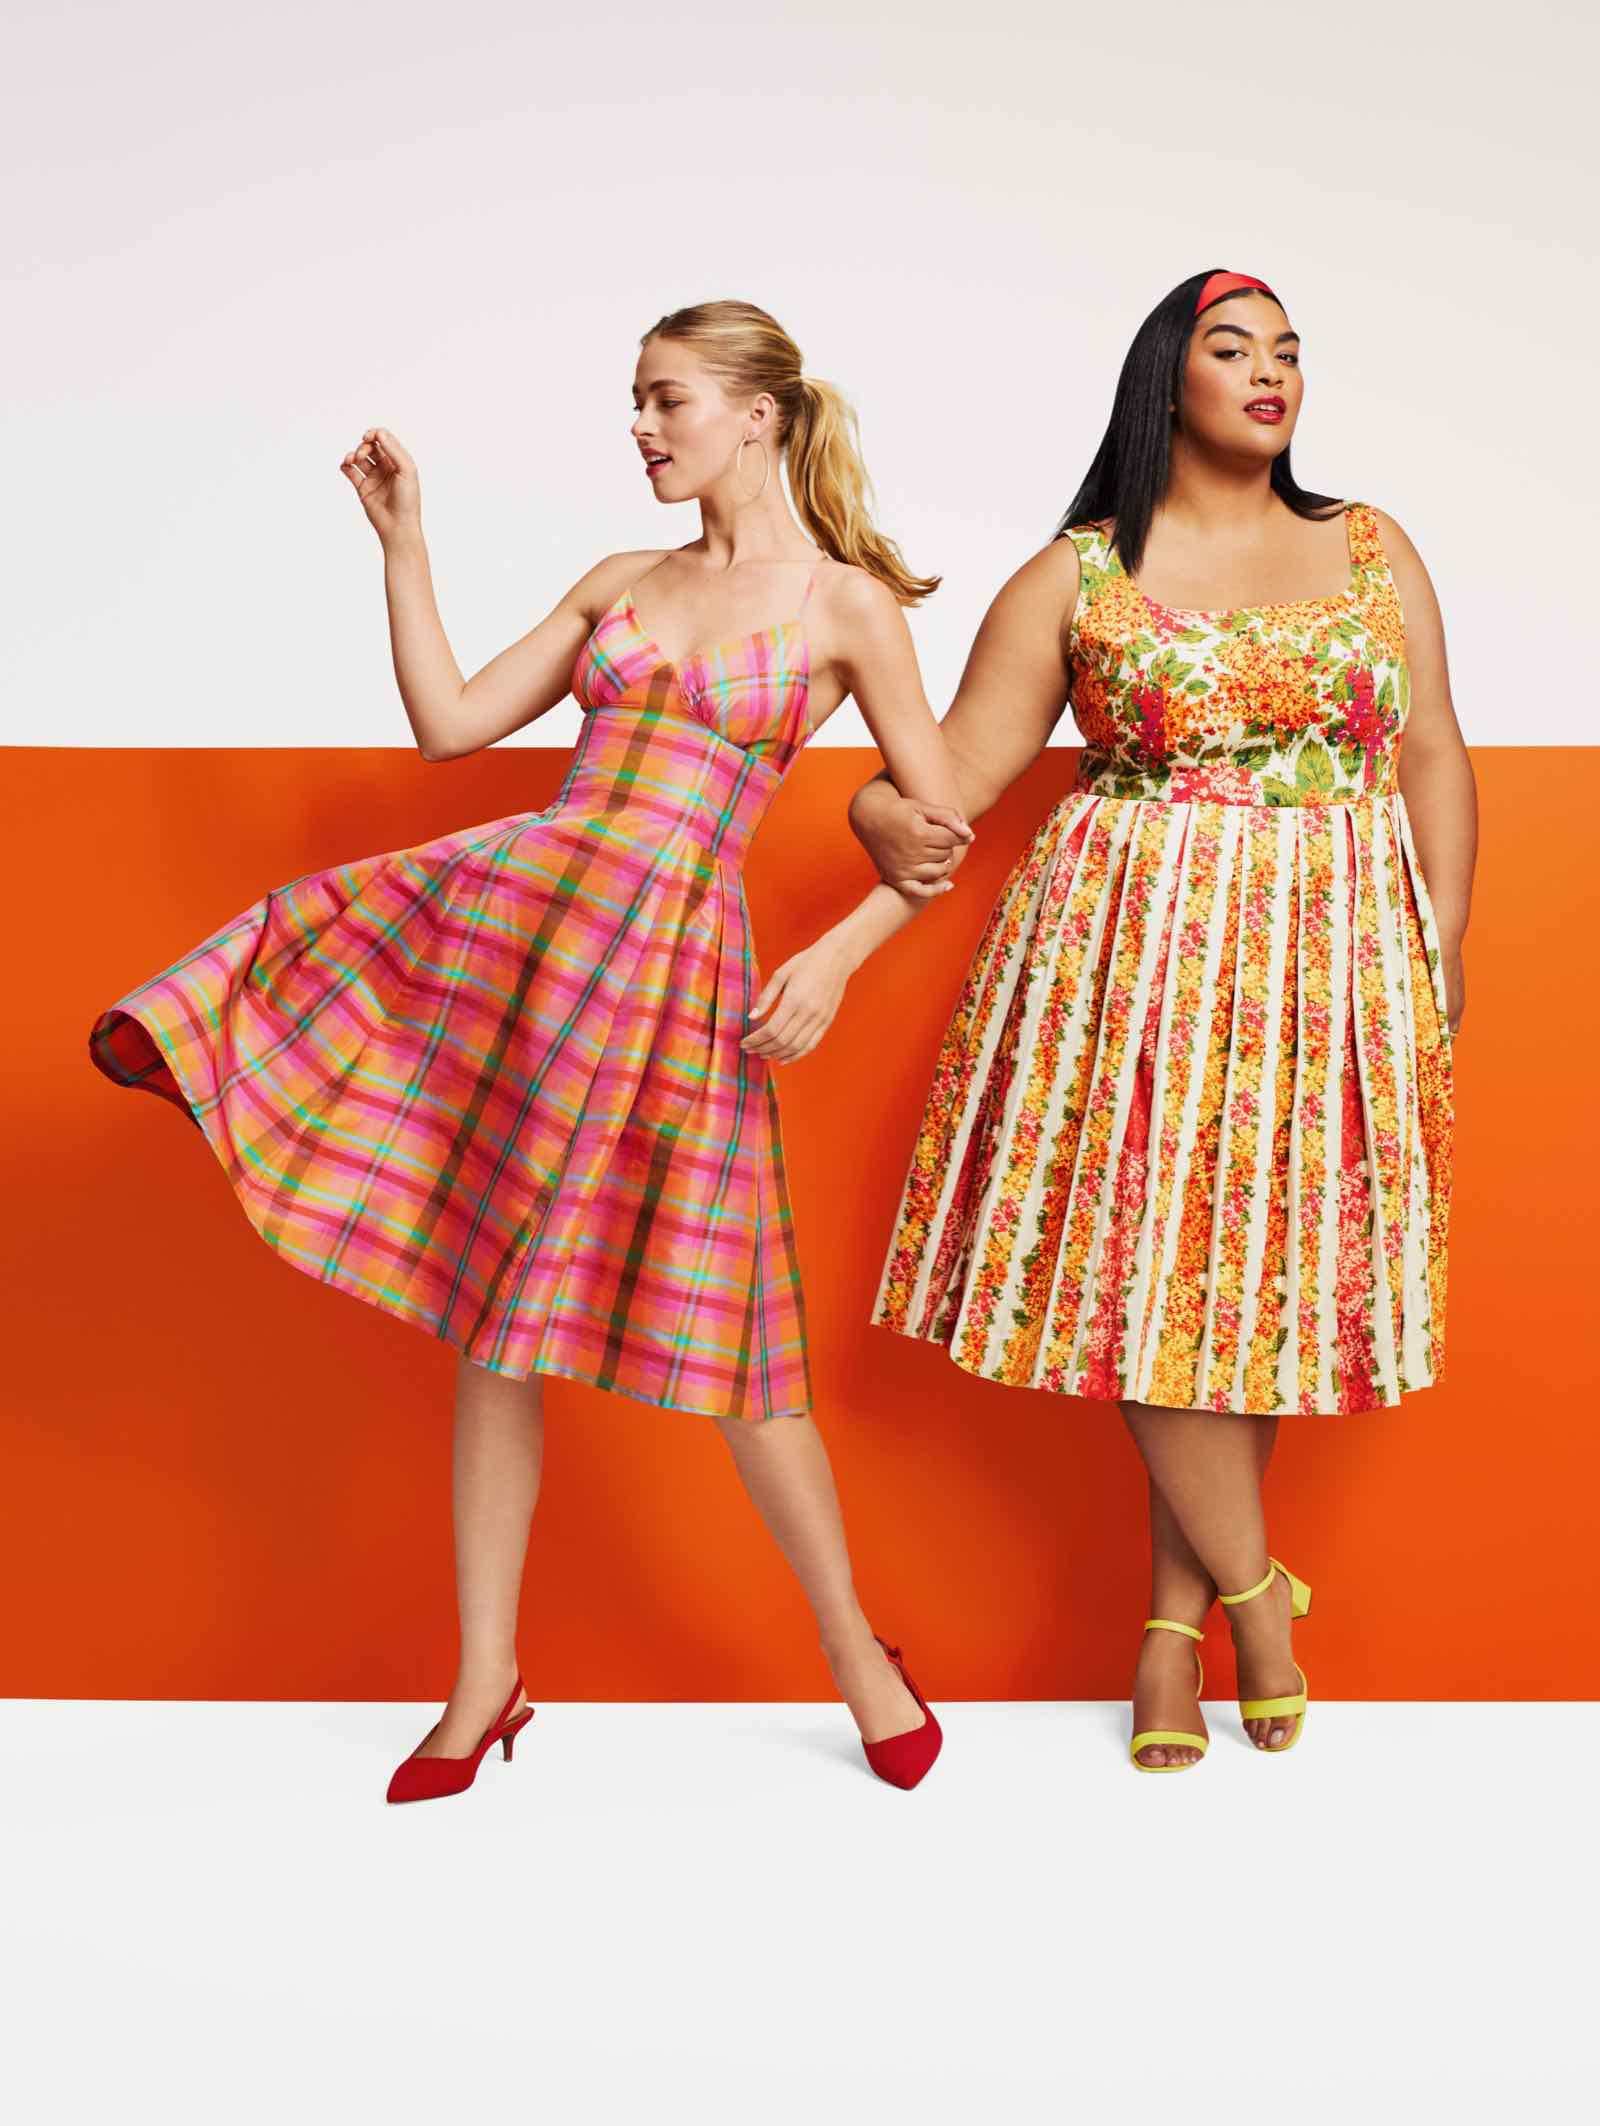 Target's 20th Anniversary Collection lookbook